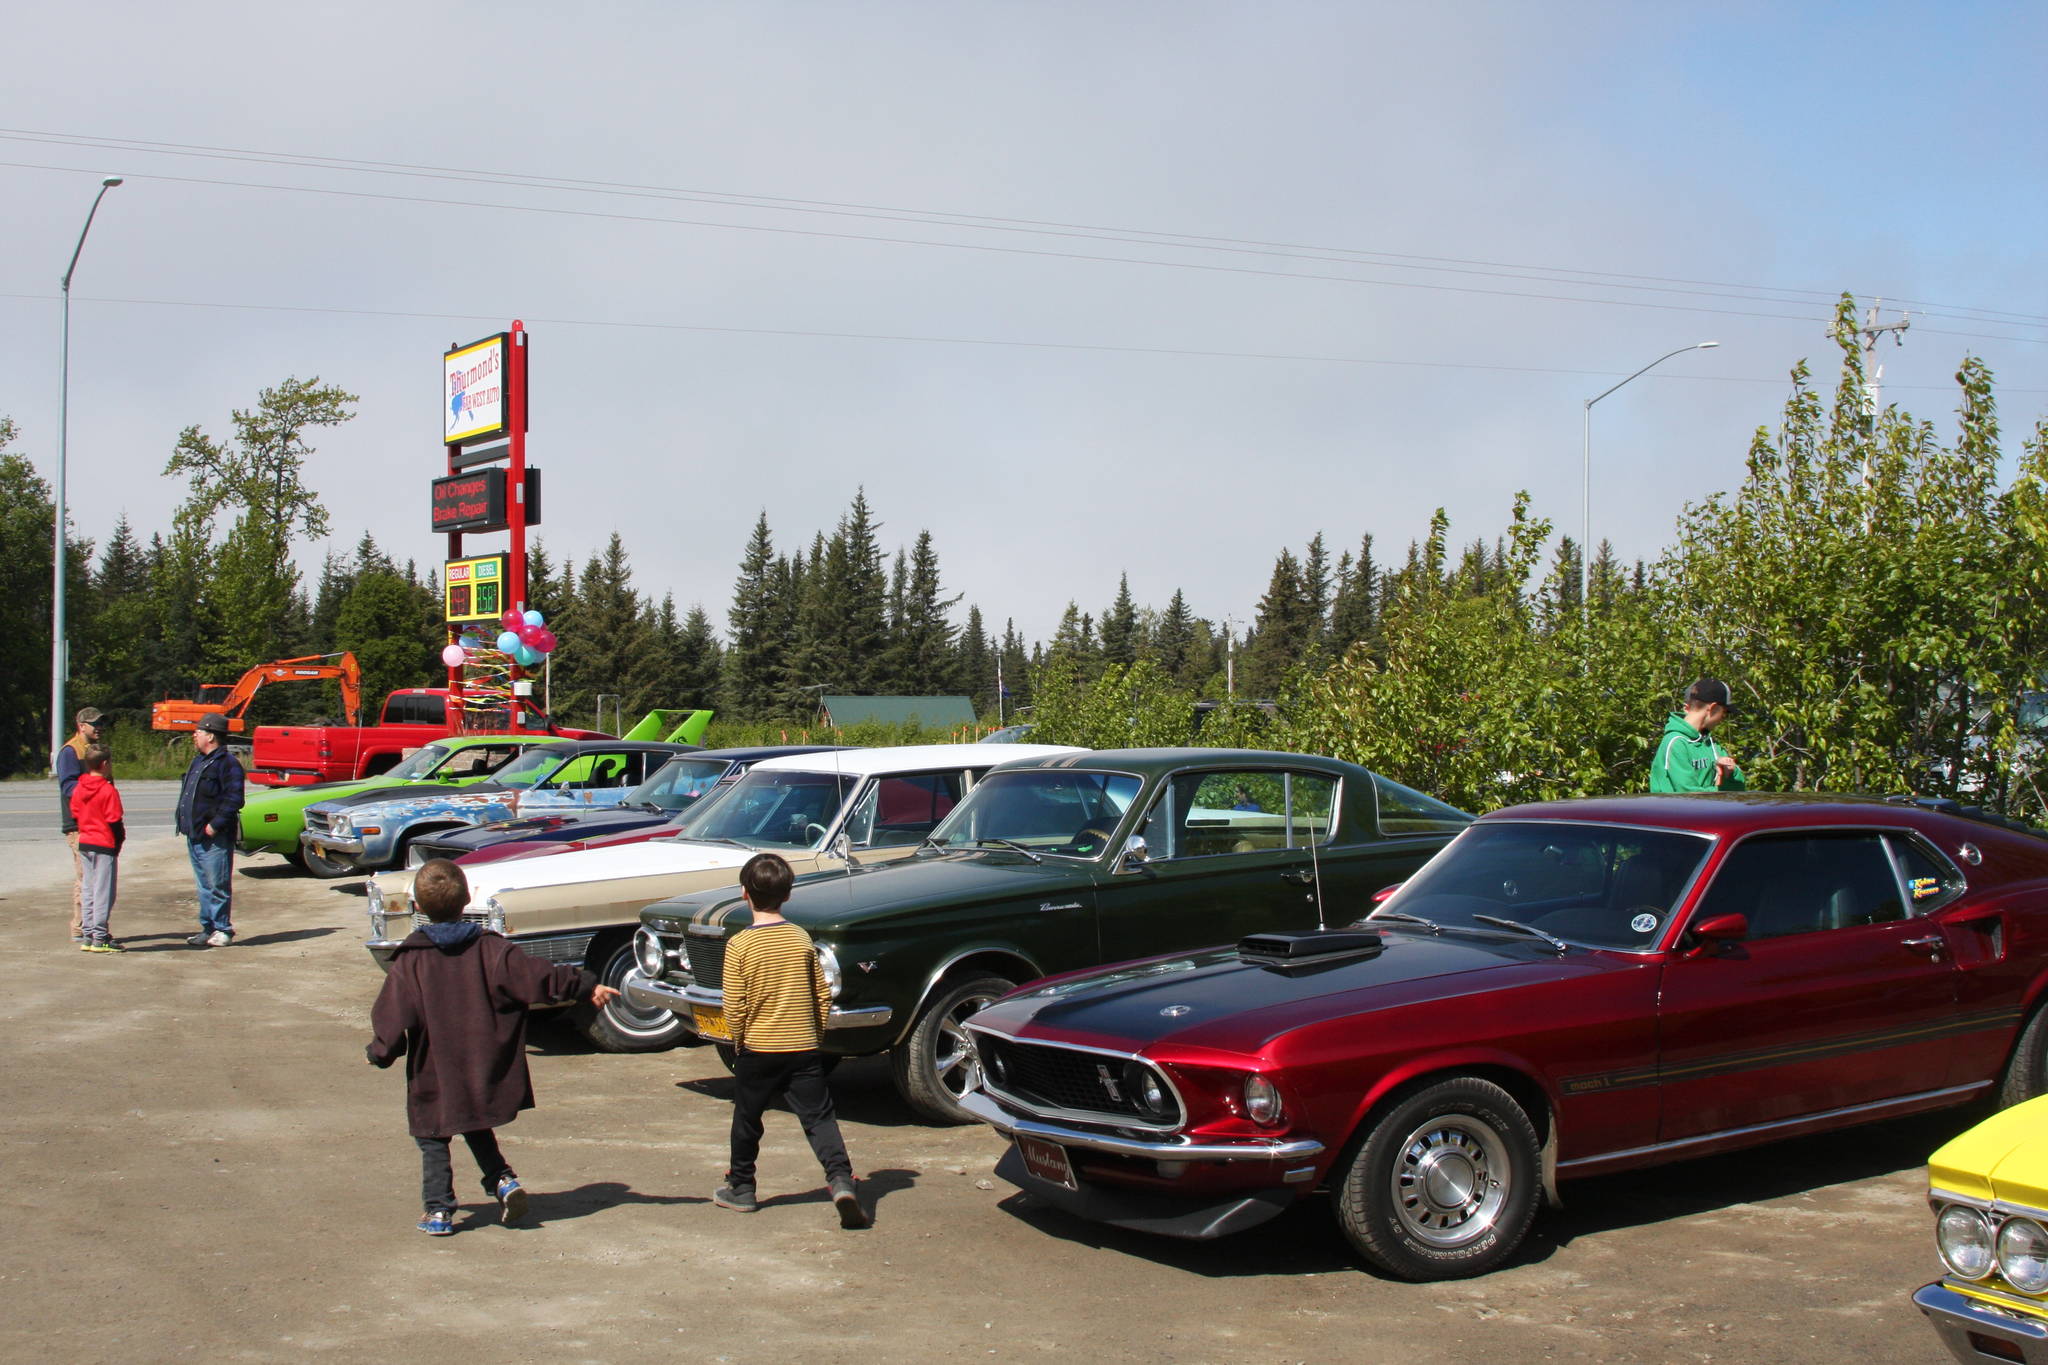 Local Anchor Point residents gather at Thurmond’s Far West Auto for their fourth annual Customer Appreciation Day on Saturday, June 9 in Anchor Point, Alaska. (Photo by Delcenia Cosman)